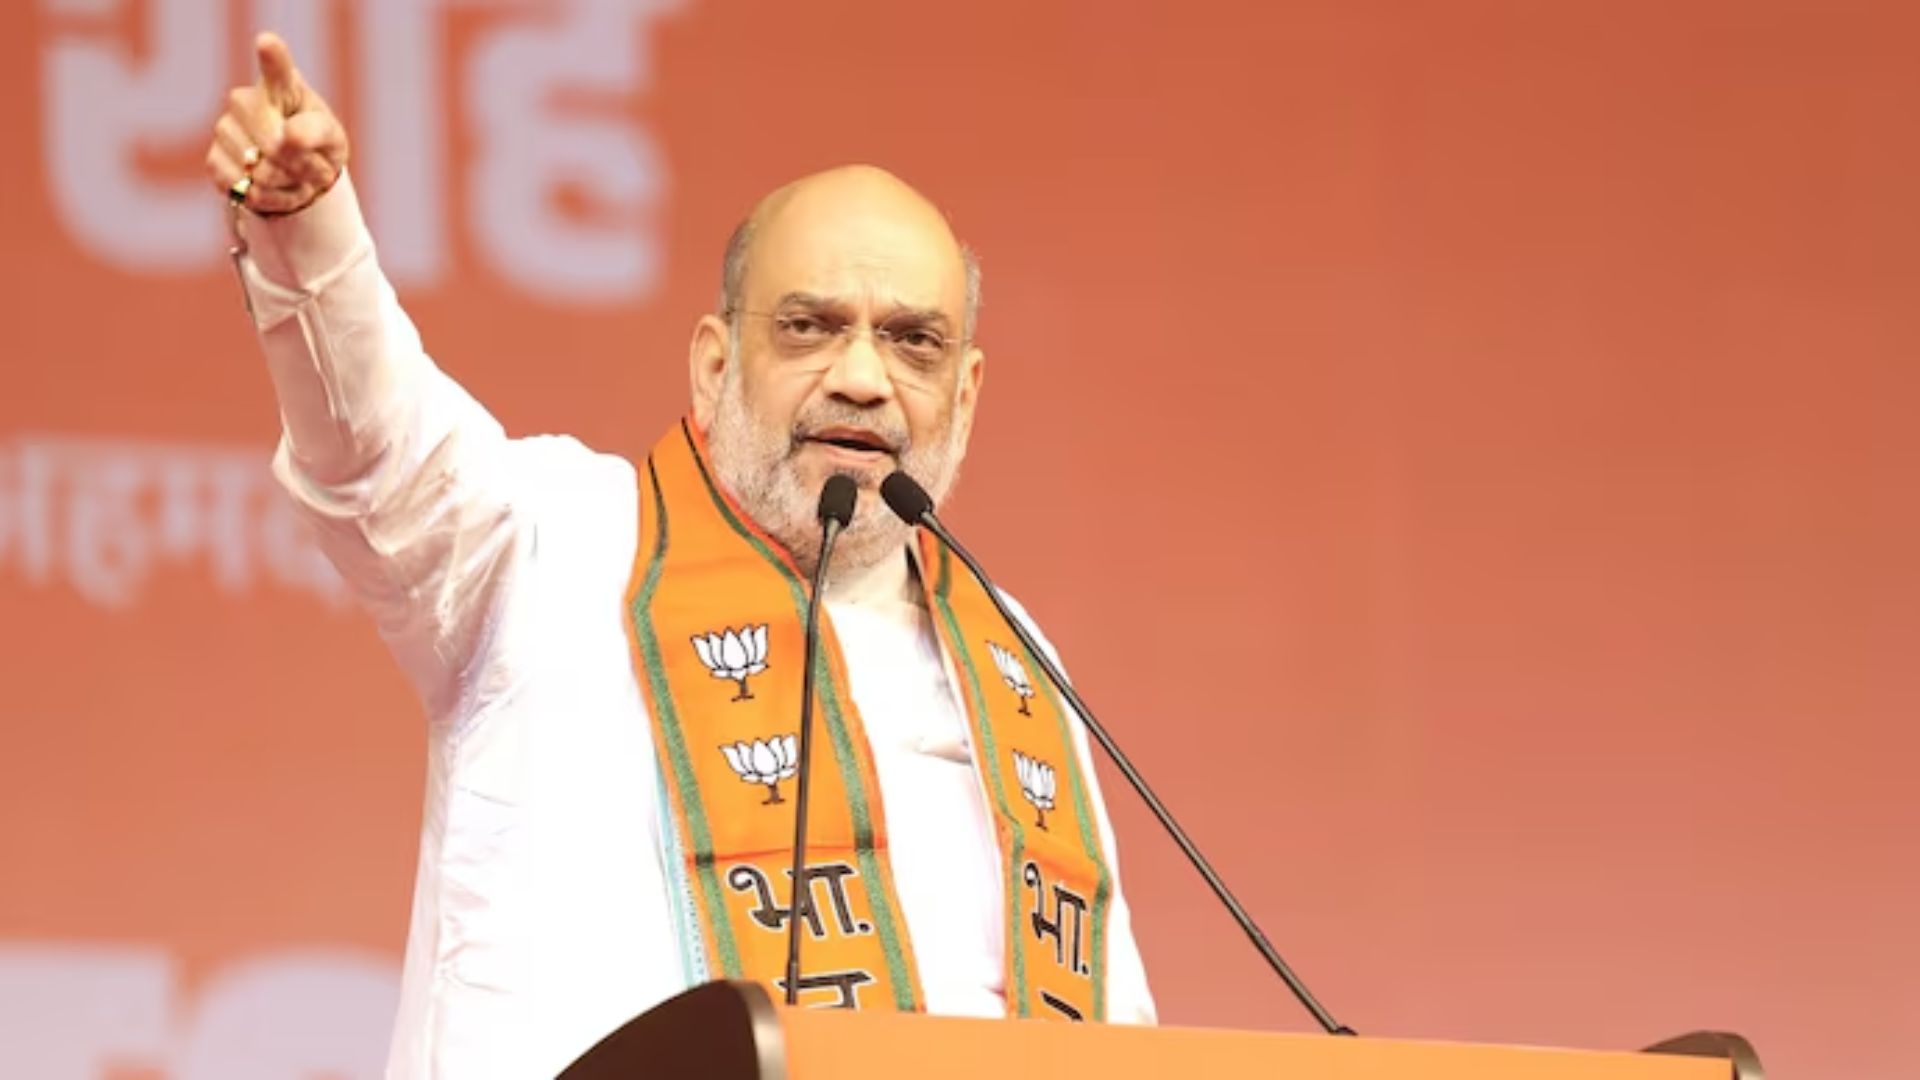 Amit Shah to conduct a road show as part of his day-long schedule in Karnataka tomorrow